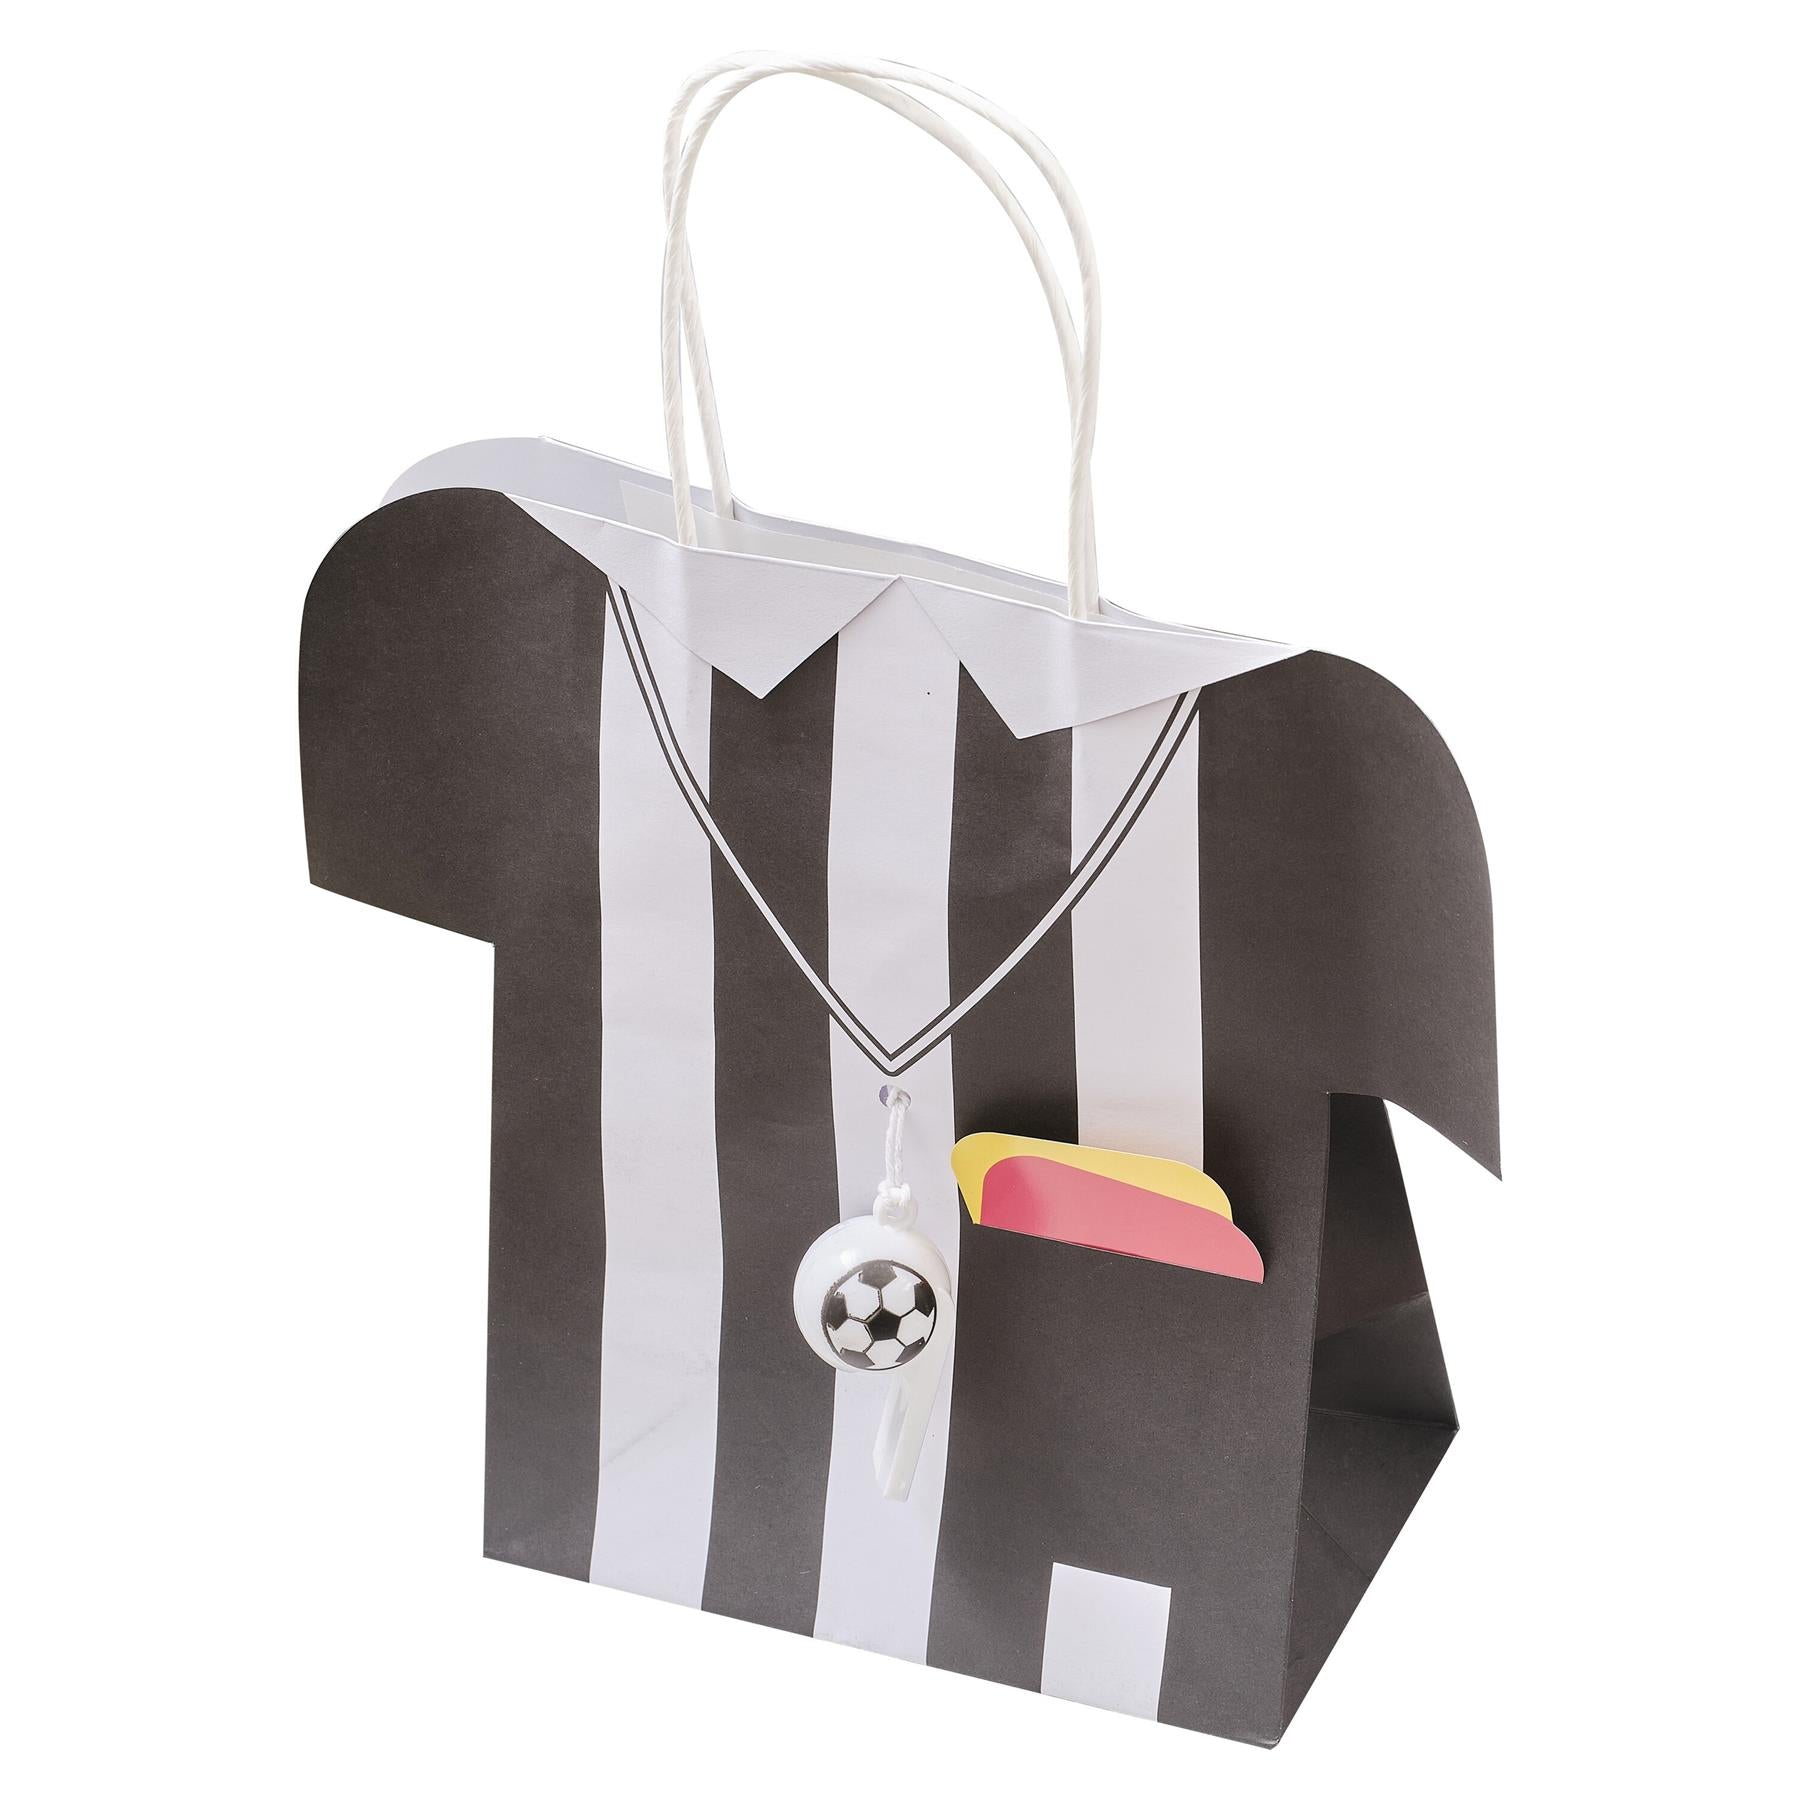 referee-shirt-football-party-bags-with-whistles-and-card-tags-x-5|FT-108|Luck and Luck|2